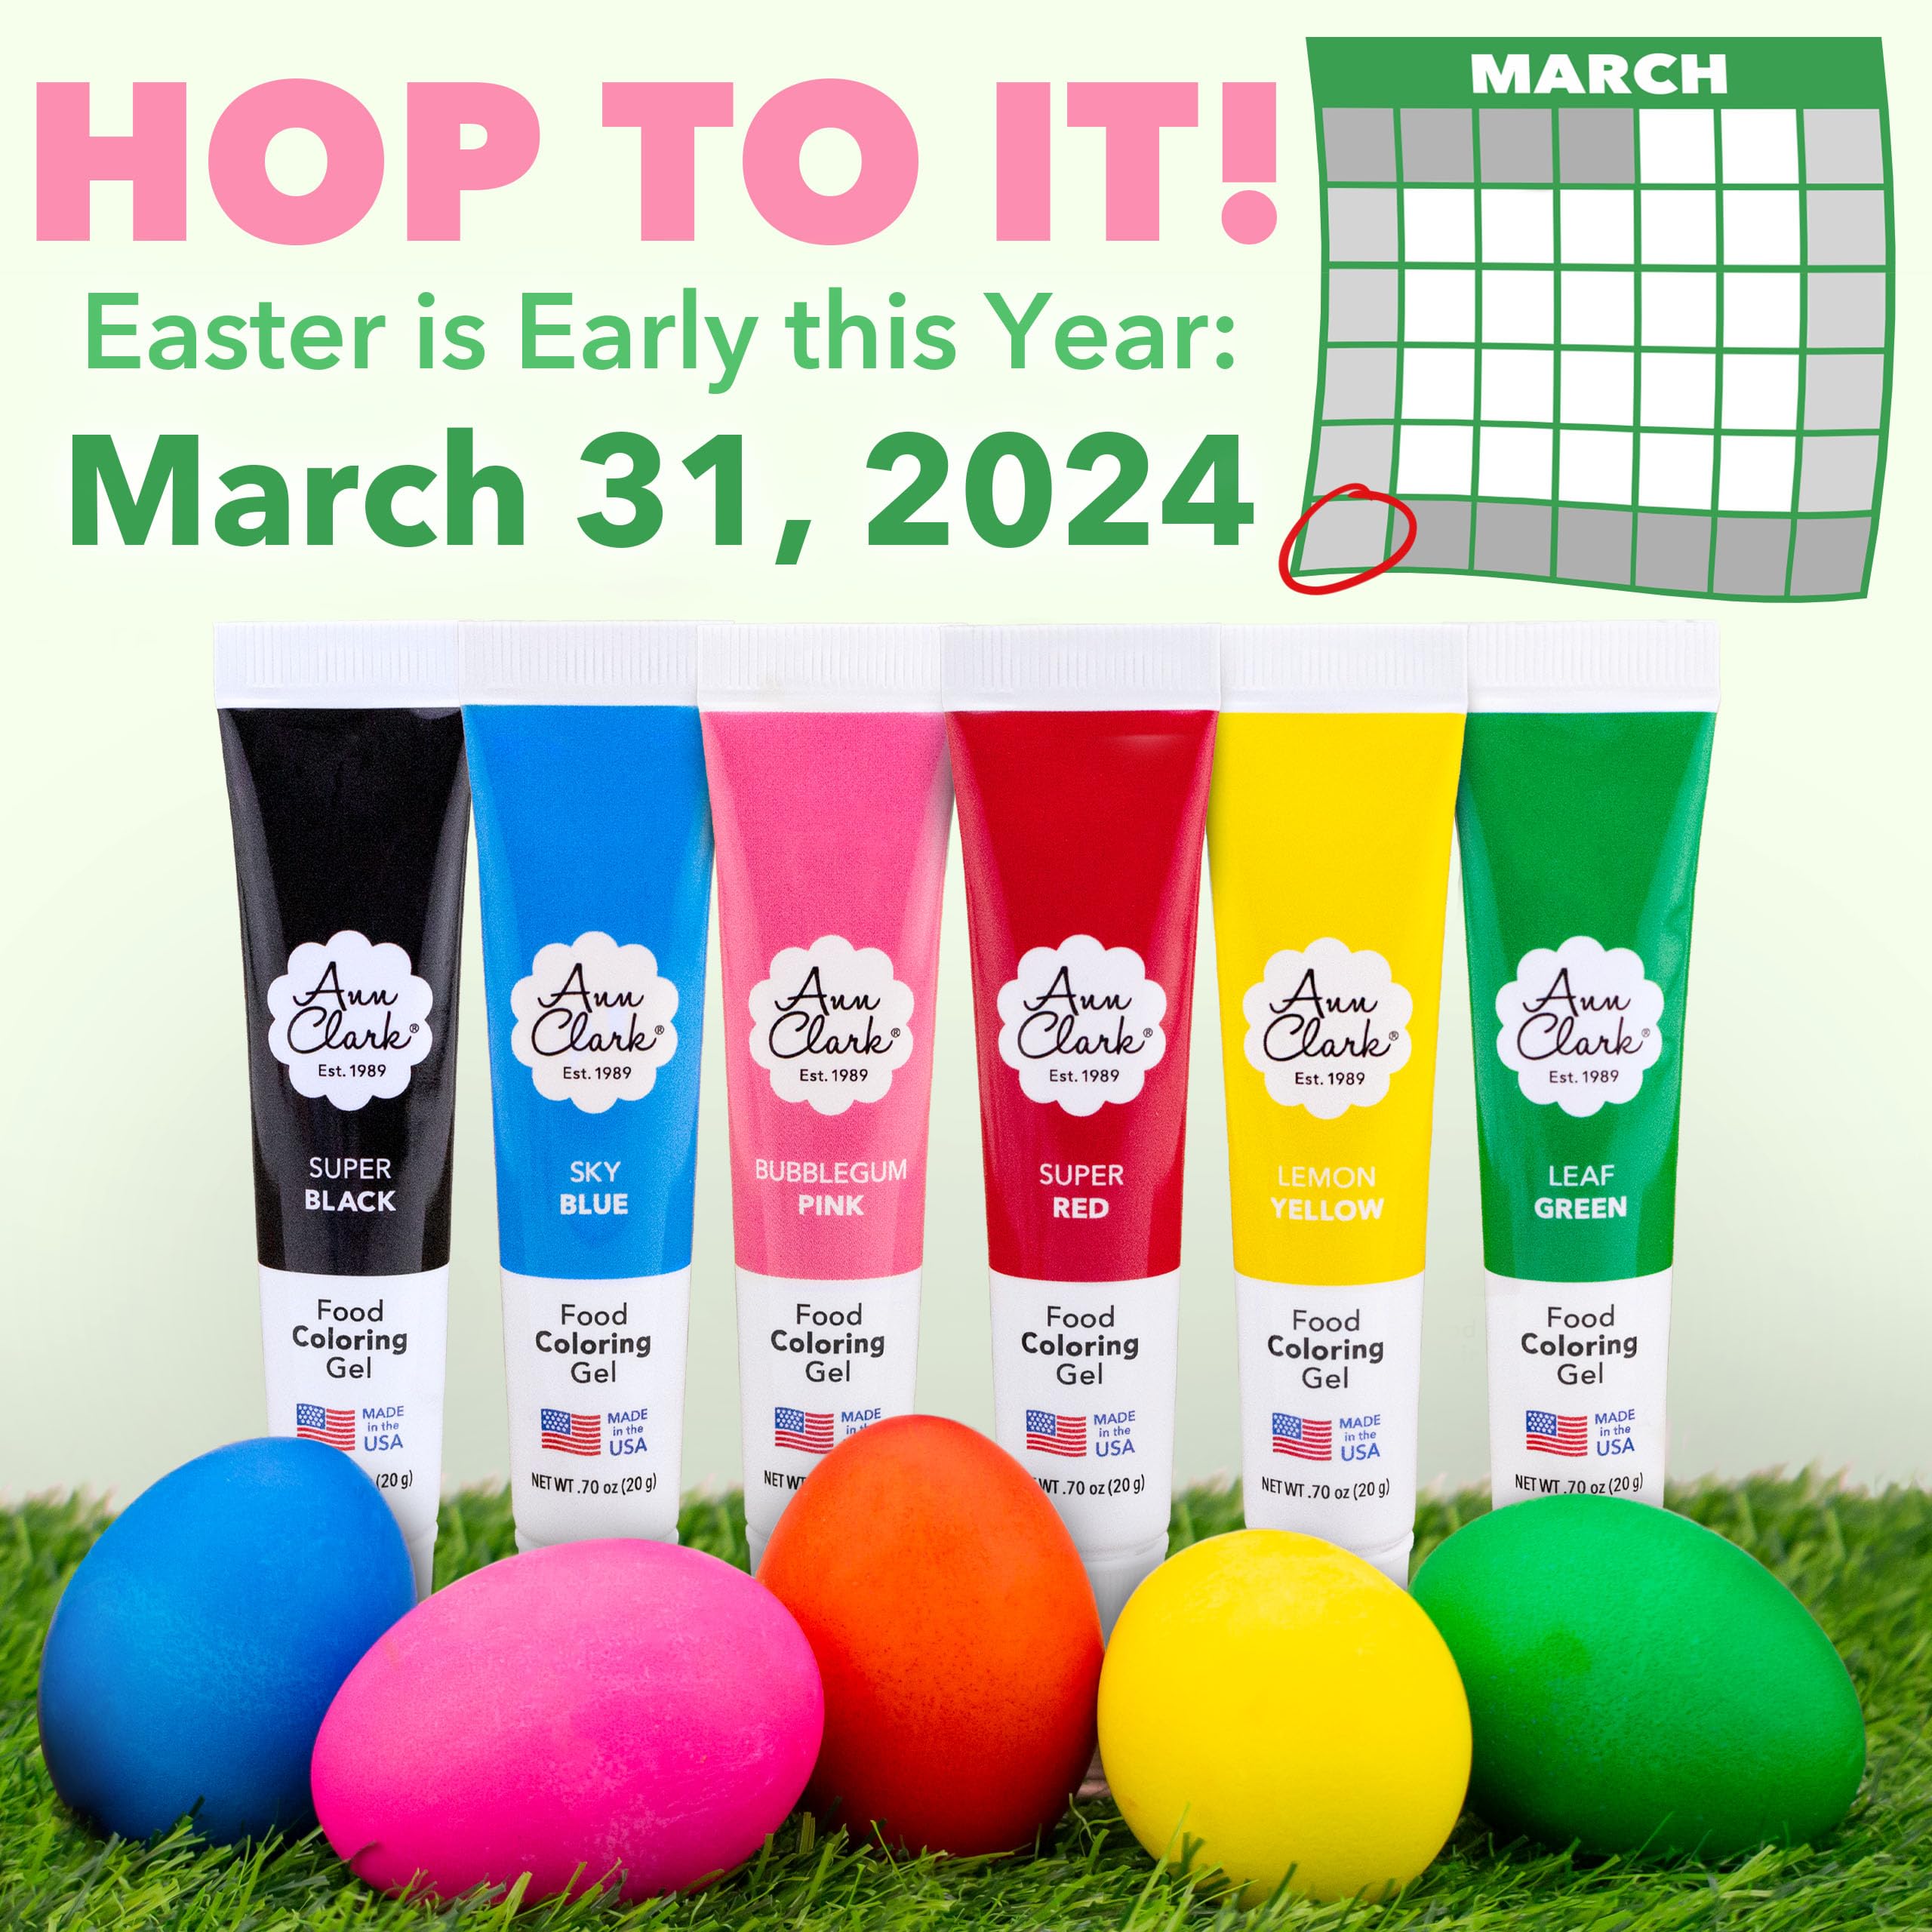 Ann Clark Professional-Grade Food Coloring Gel & Easter Egg Dye Made in USA, 7 oz. Tubes, 6 Colors